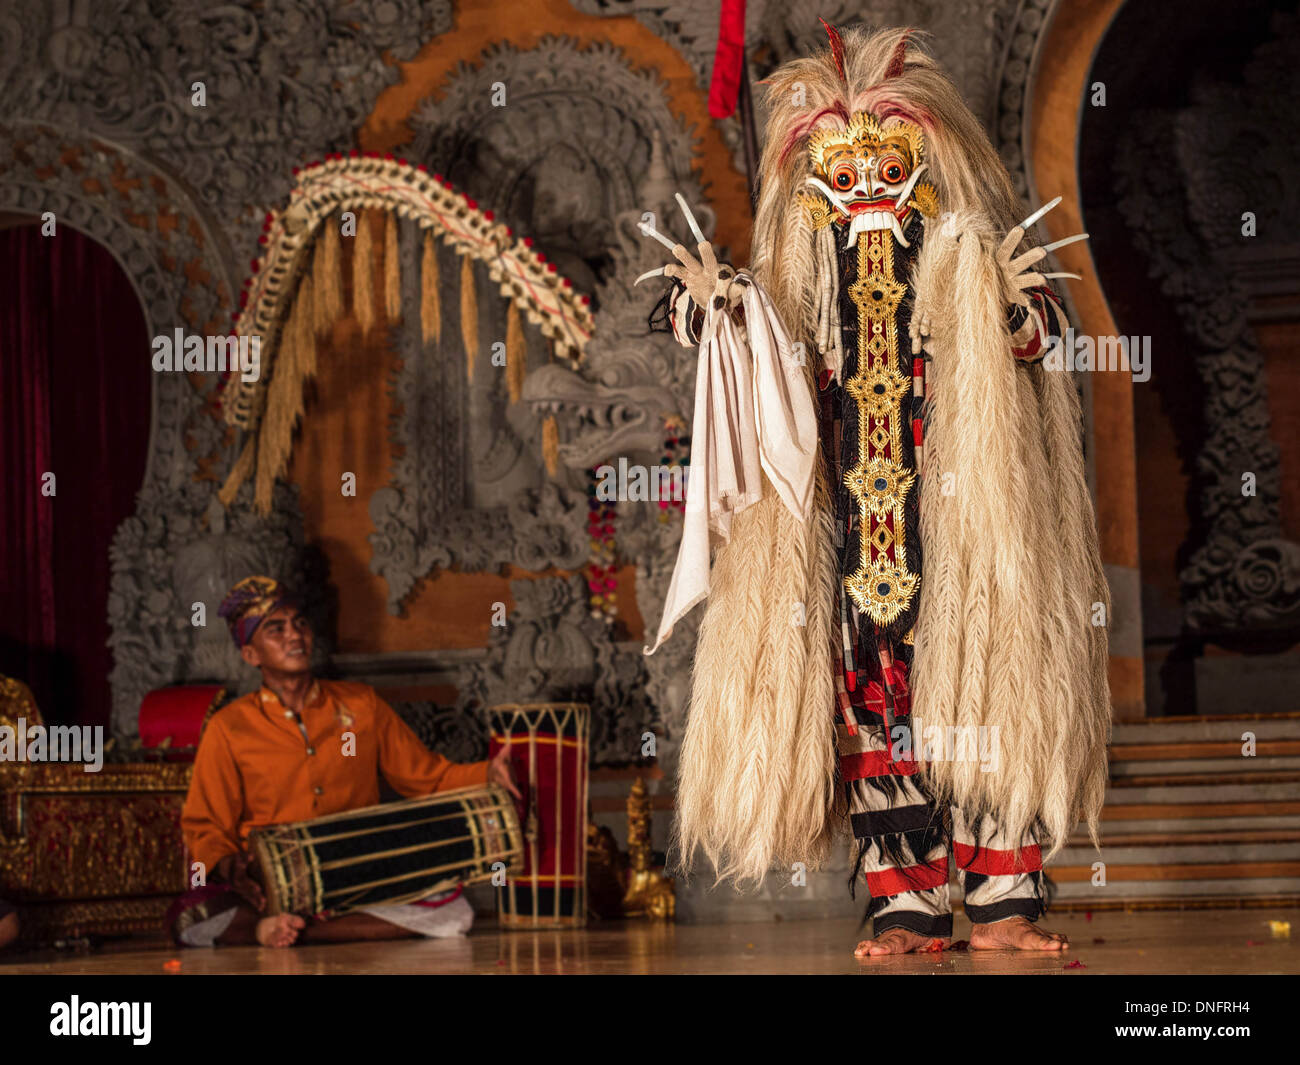 Representation of Rangda on stage in traditional Balinese Barong Dance performance in Ubud, Bali, Indonesia. Stock Photo